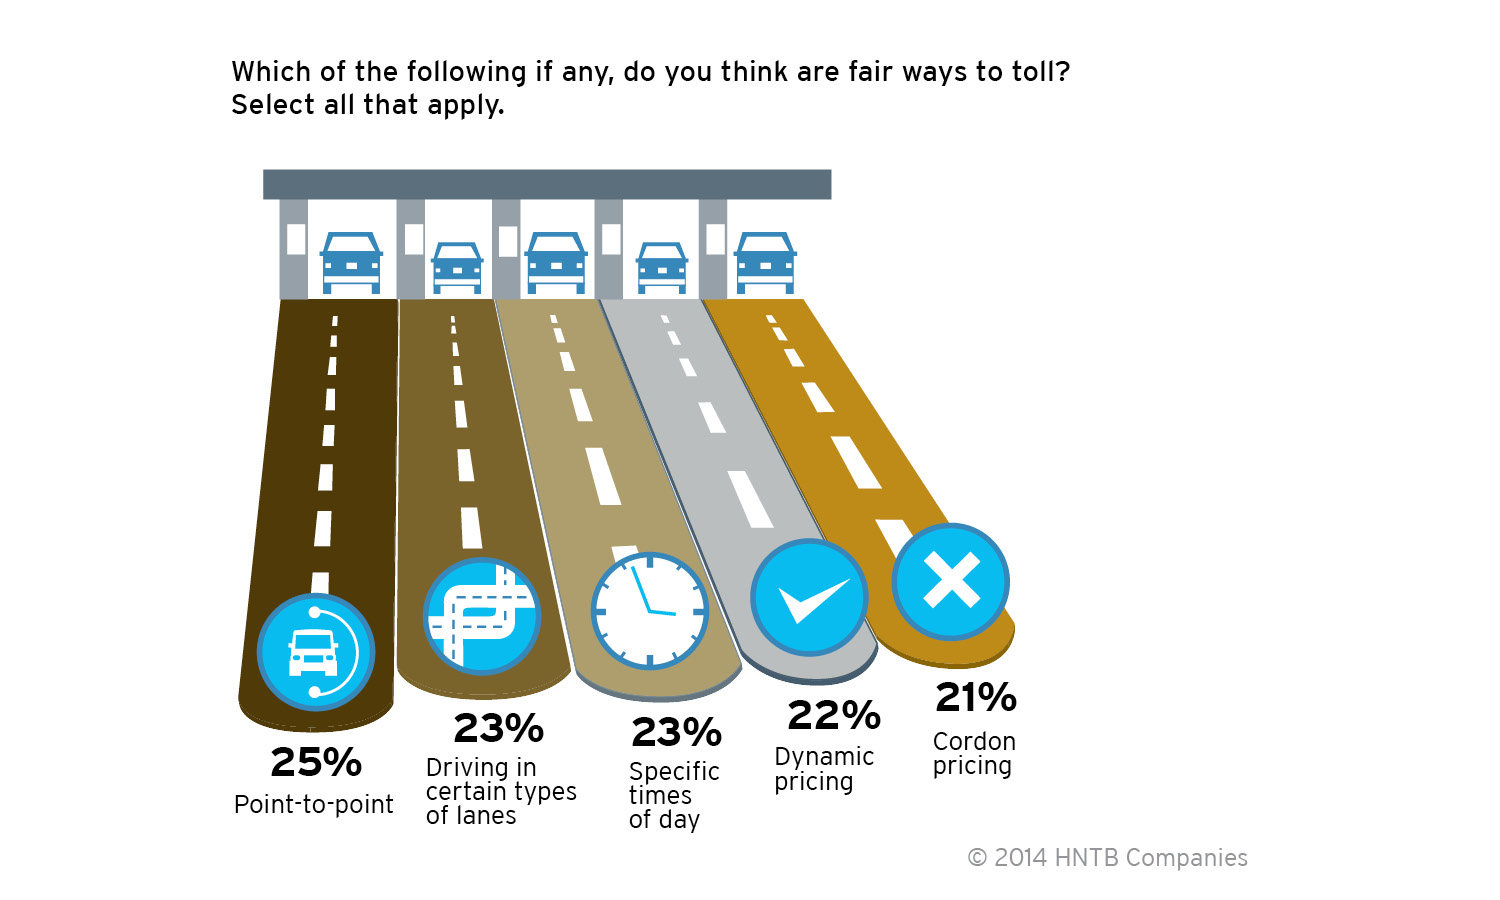 Around 1 in 4 Americans believe each of these are fair ways to toll: point-to-point, fares set for driving in certain types of lanes or specific times of the day, dynamic pricing and cordon pricing.